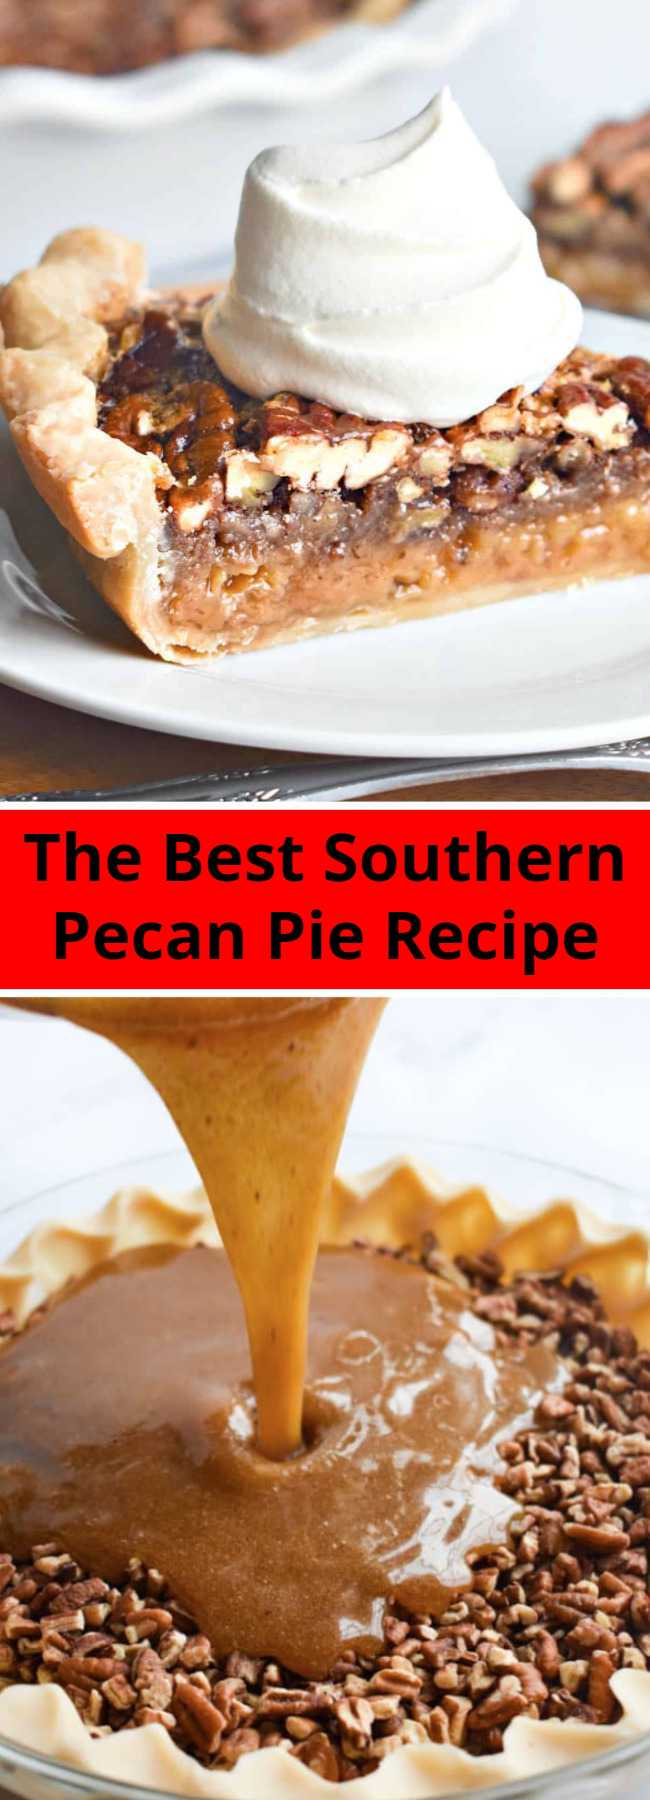 The Best Southern Pecan Pie Recipe - The Best Southern Pecan Pie is made with a flaky pie crust, real butter, dark corn syrup, a touch of cinnamon and fresh pecans.